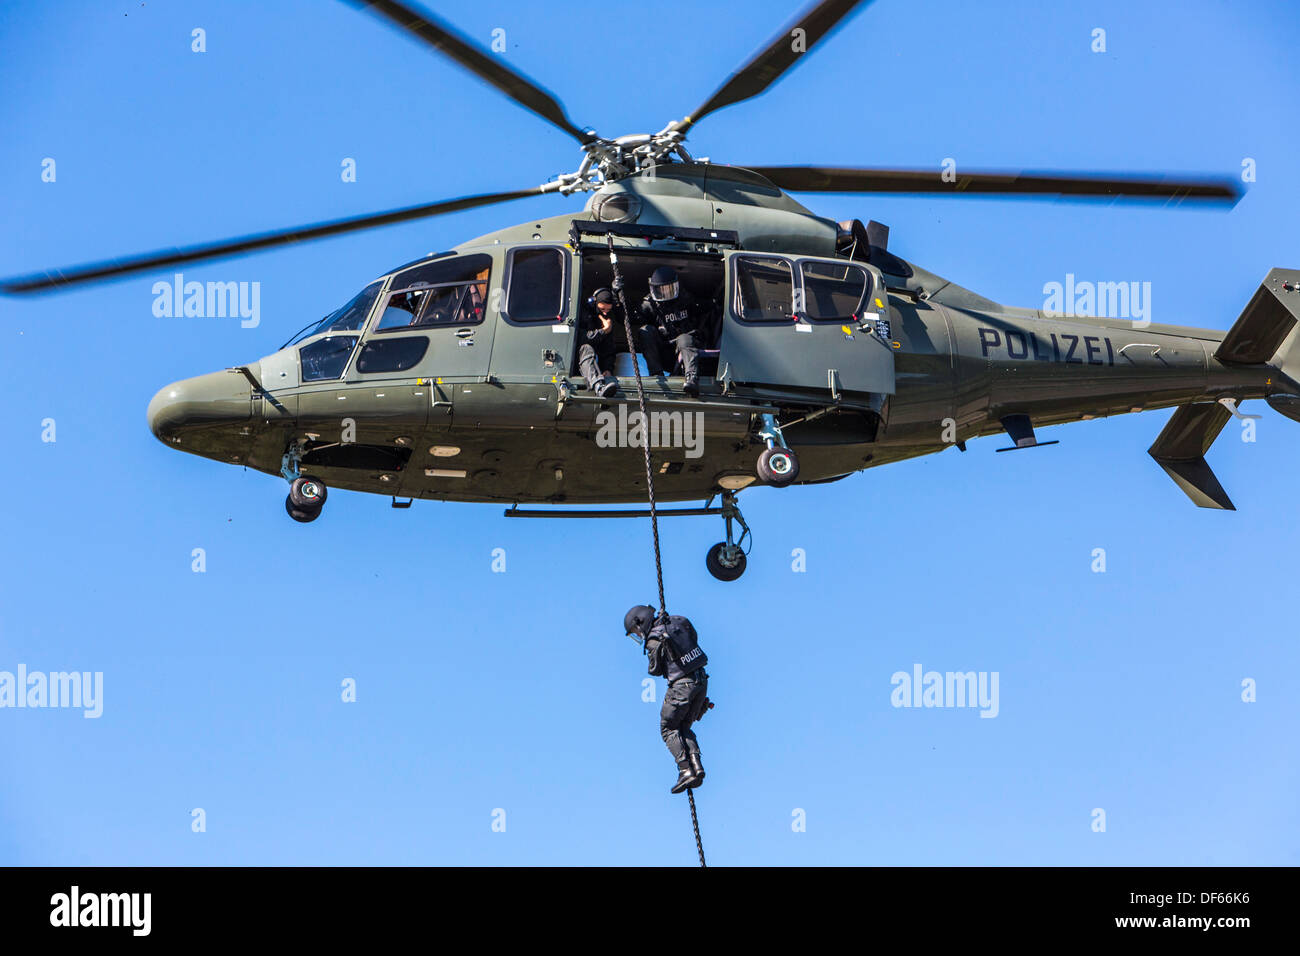 Police SWAT Team, fast roping from a police helicopter. Stock Photo